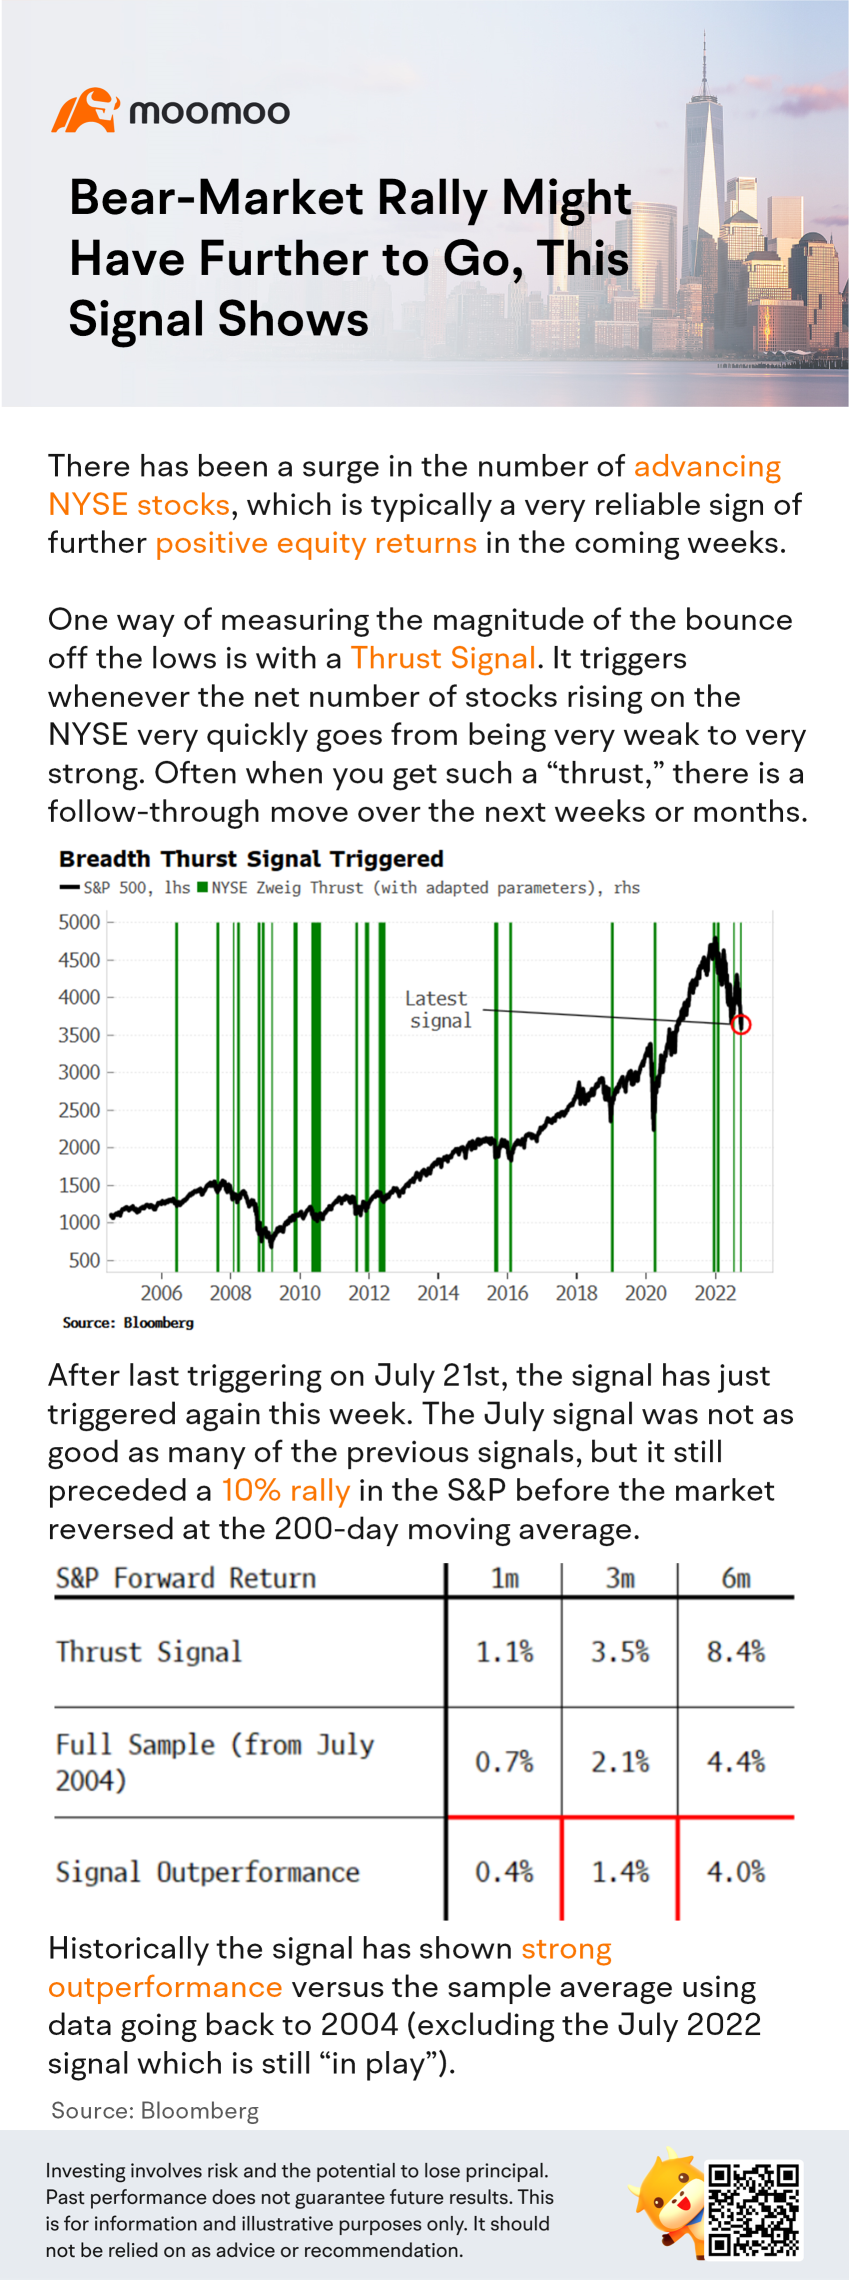 Bear-Market Rally Might Have Further to Go, This Signal Shows